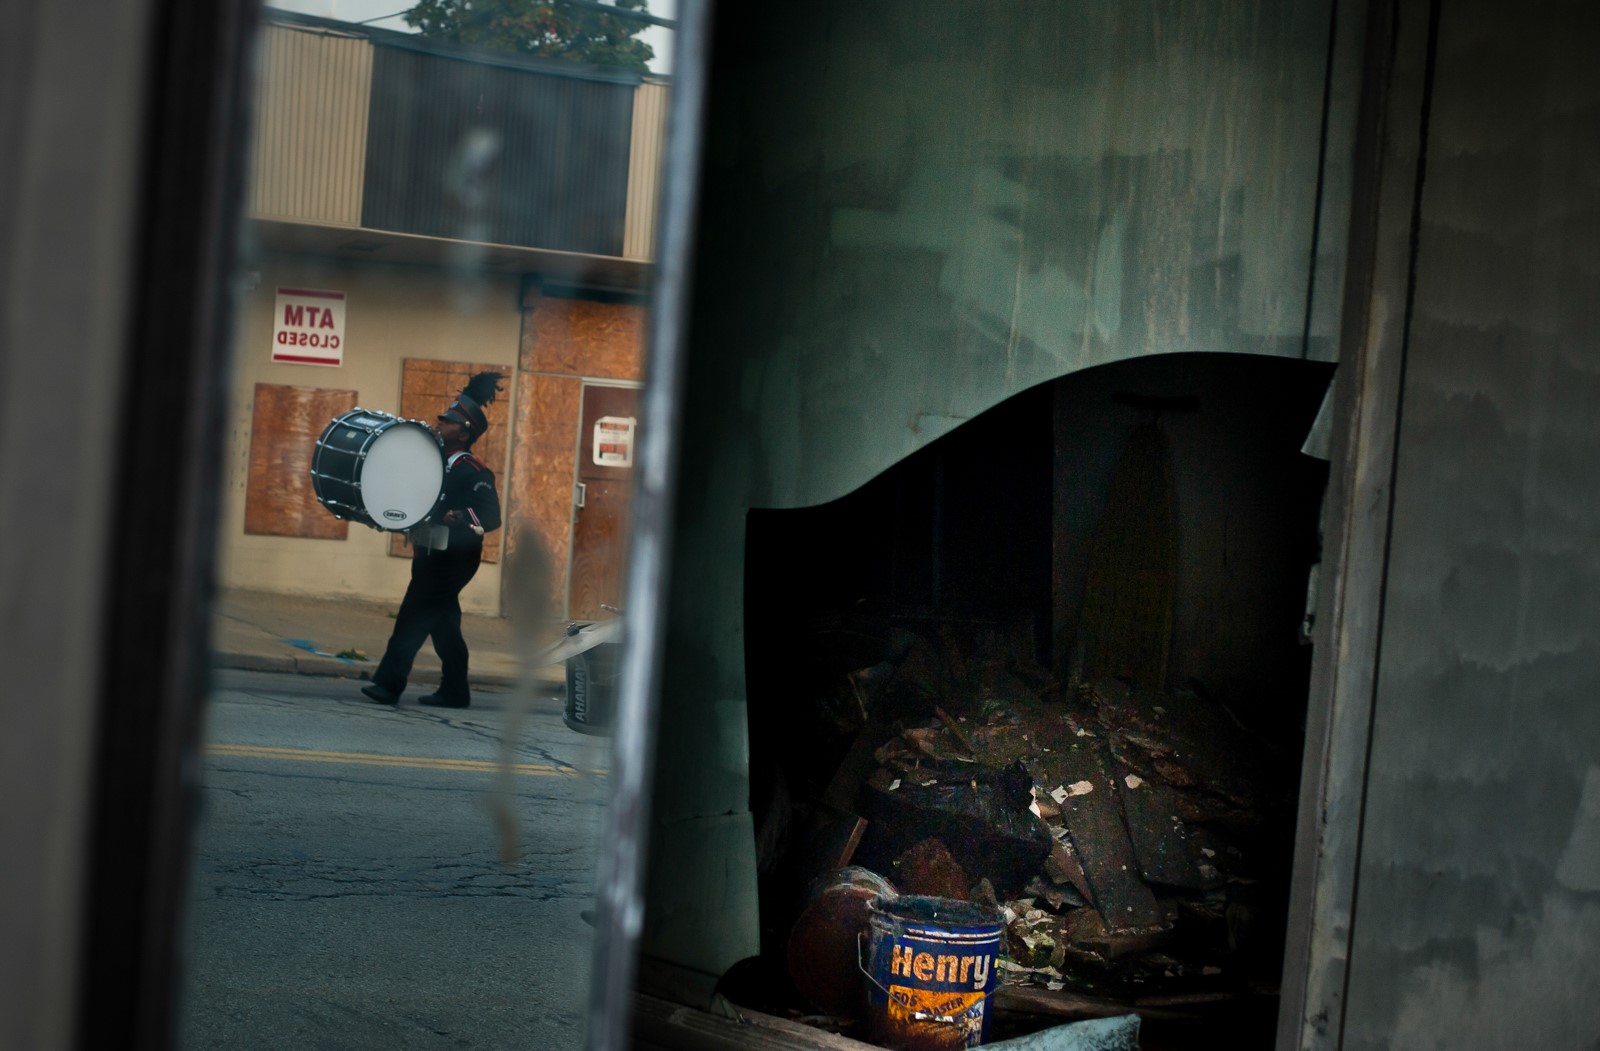 In the reflection of a shattered storefront, a marching band drummer walks down the street.